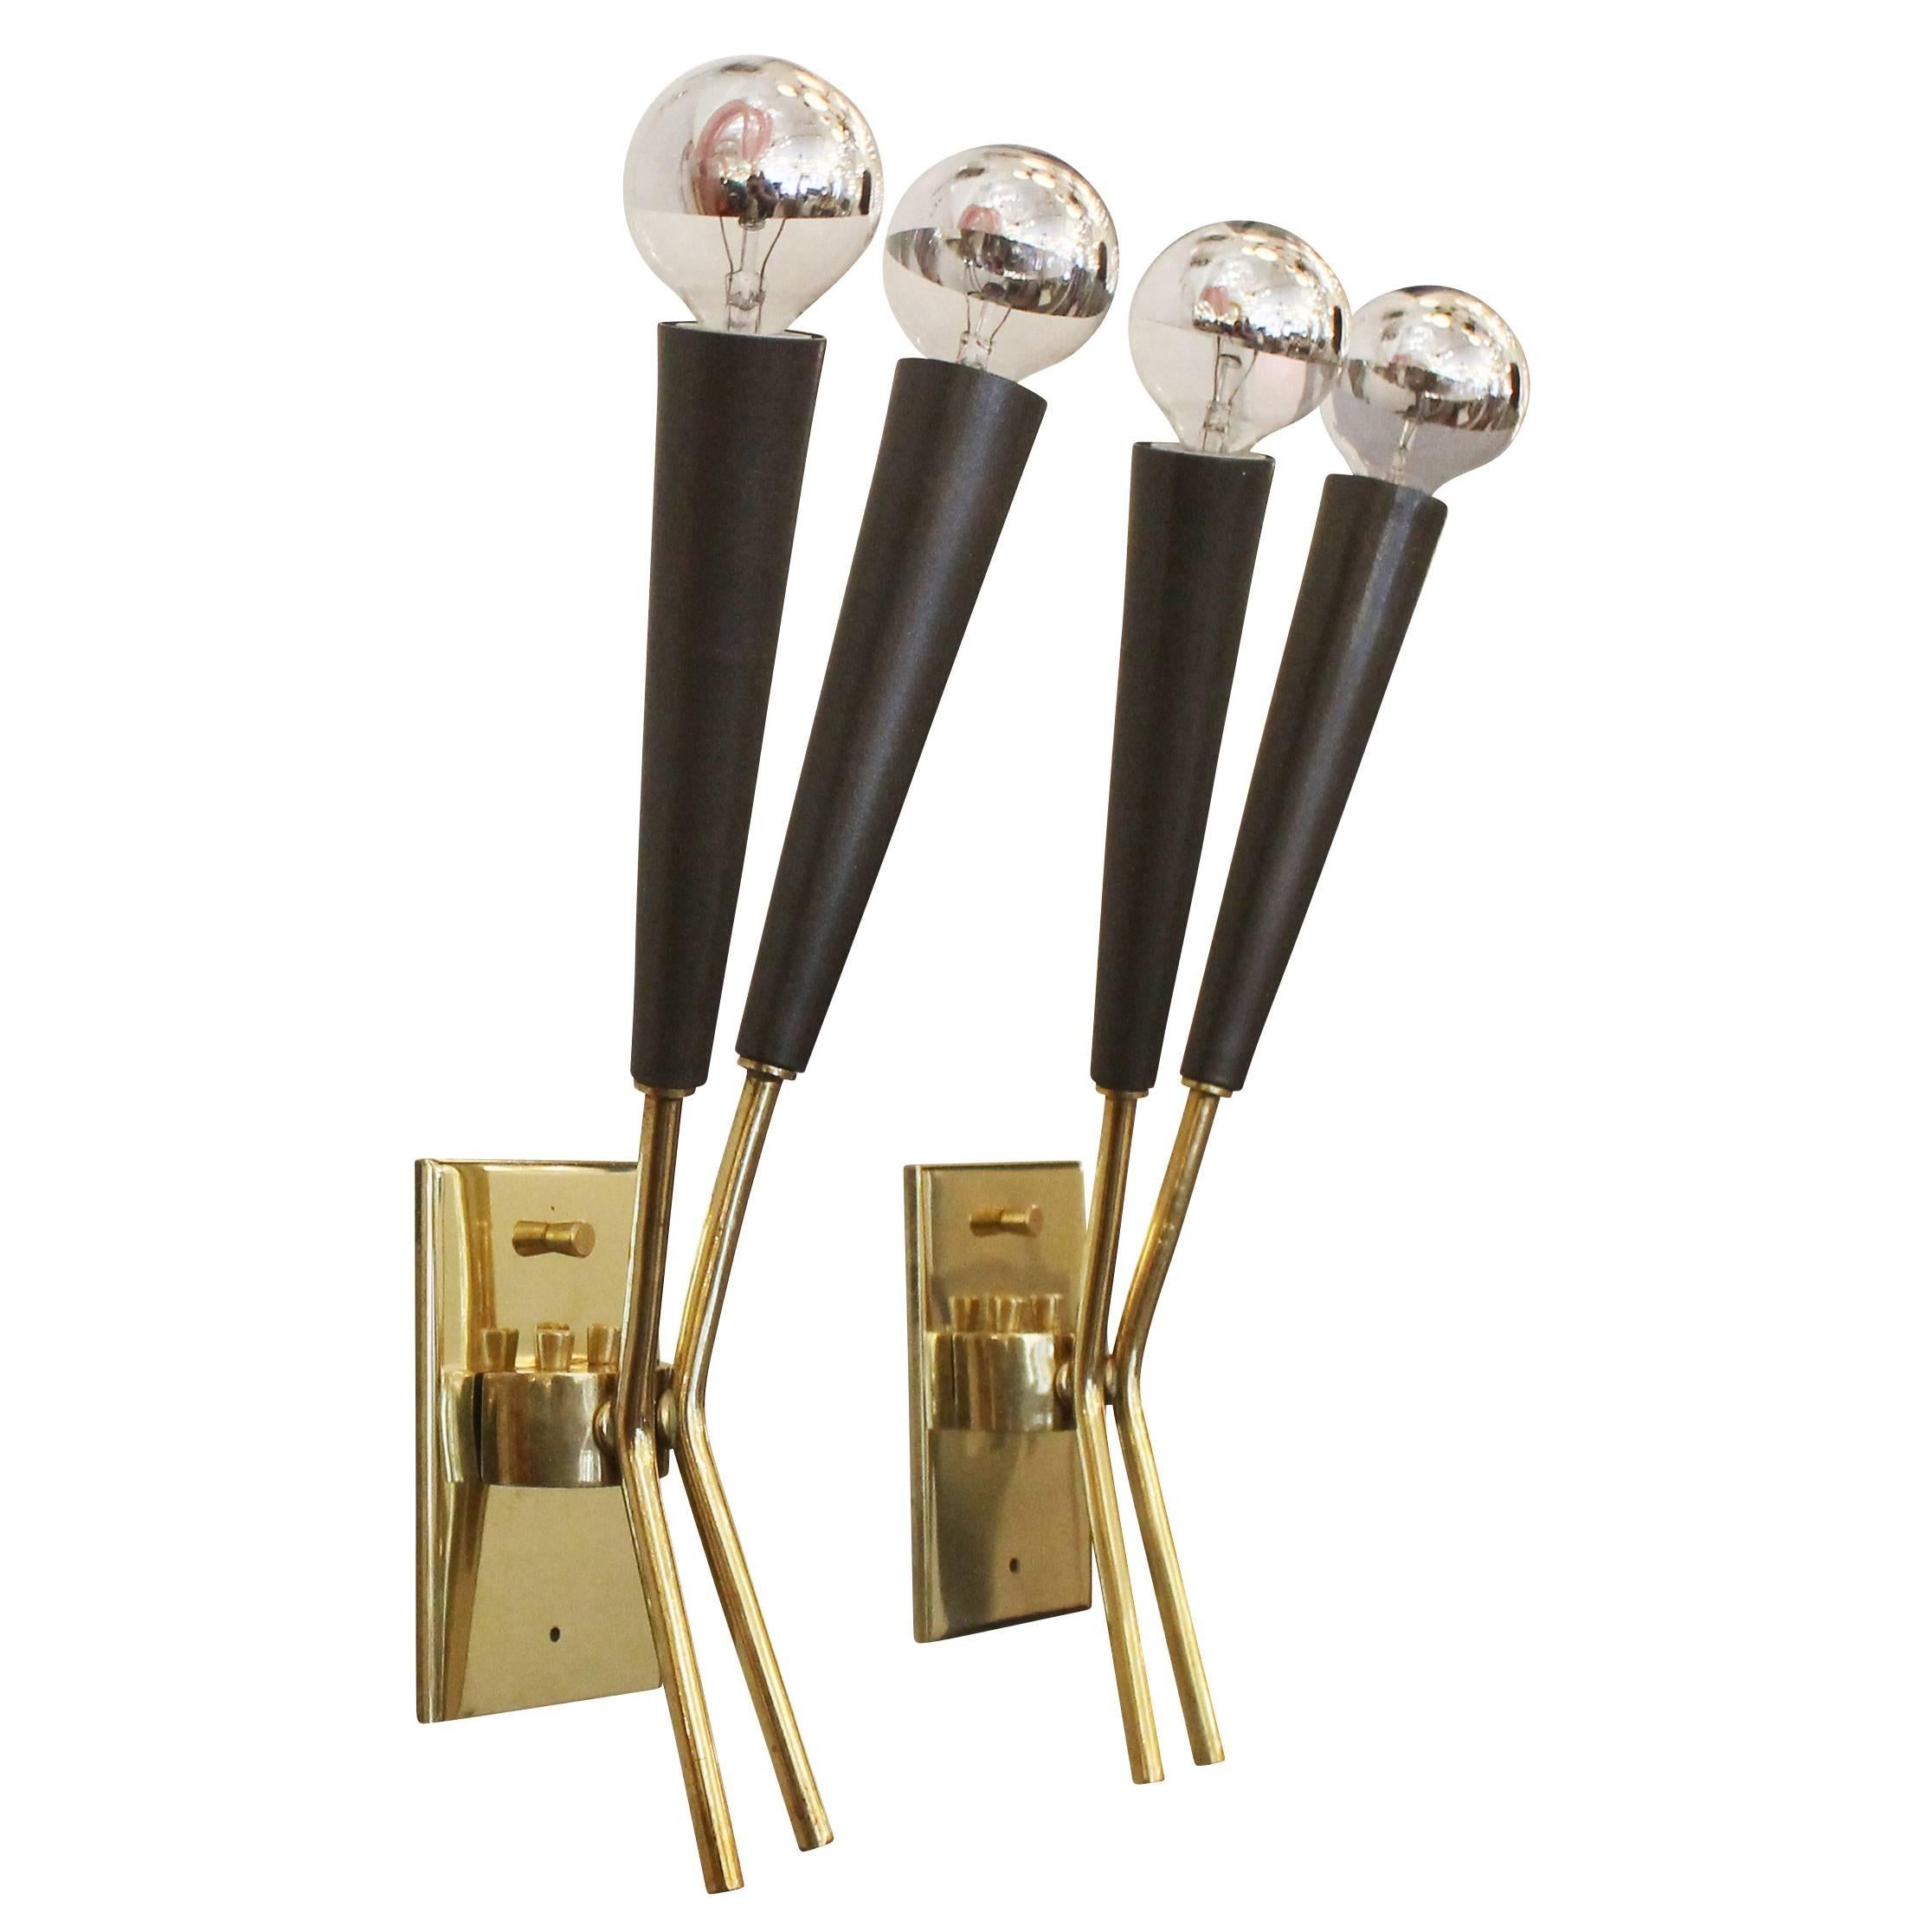 Sleek pair of wall lights in the manner of Stilnovo. The frame is brass and the diffusers gun metal painted aluminium. Each holds two candelabra sockets.
